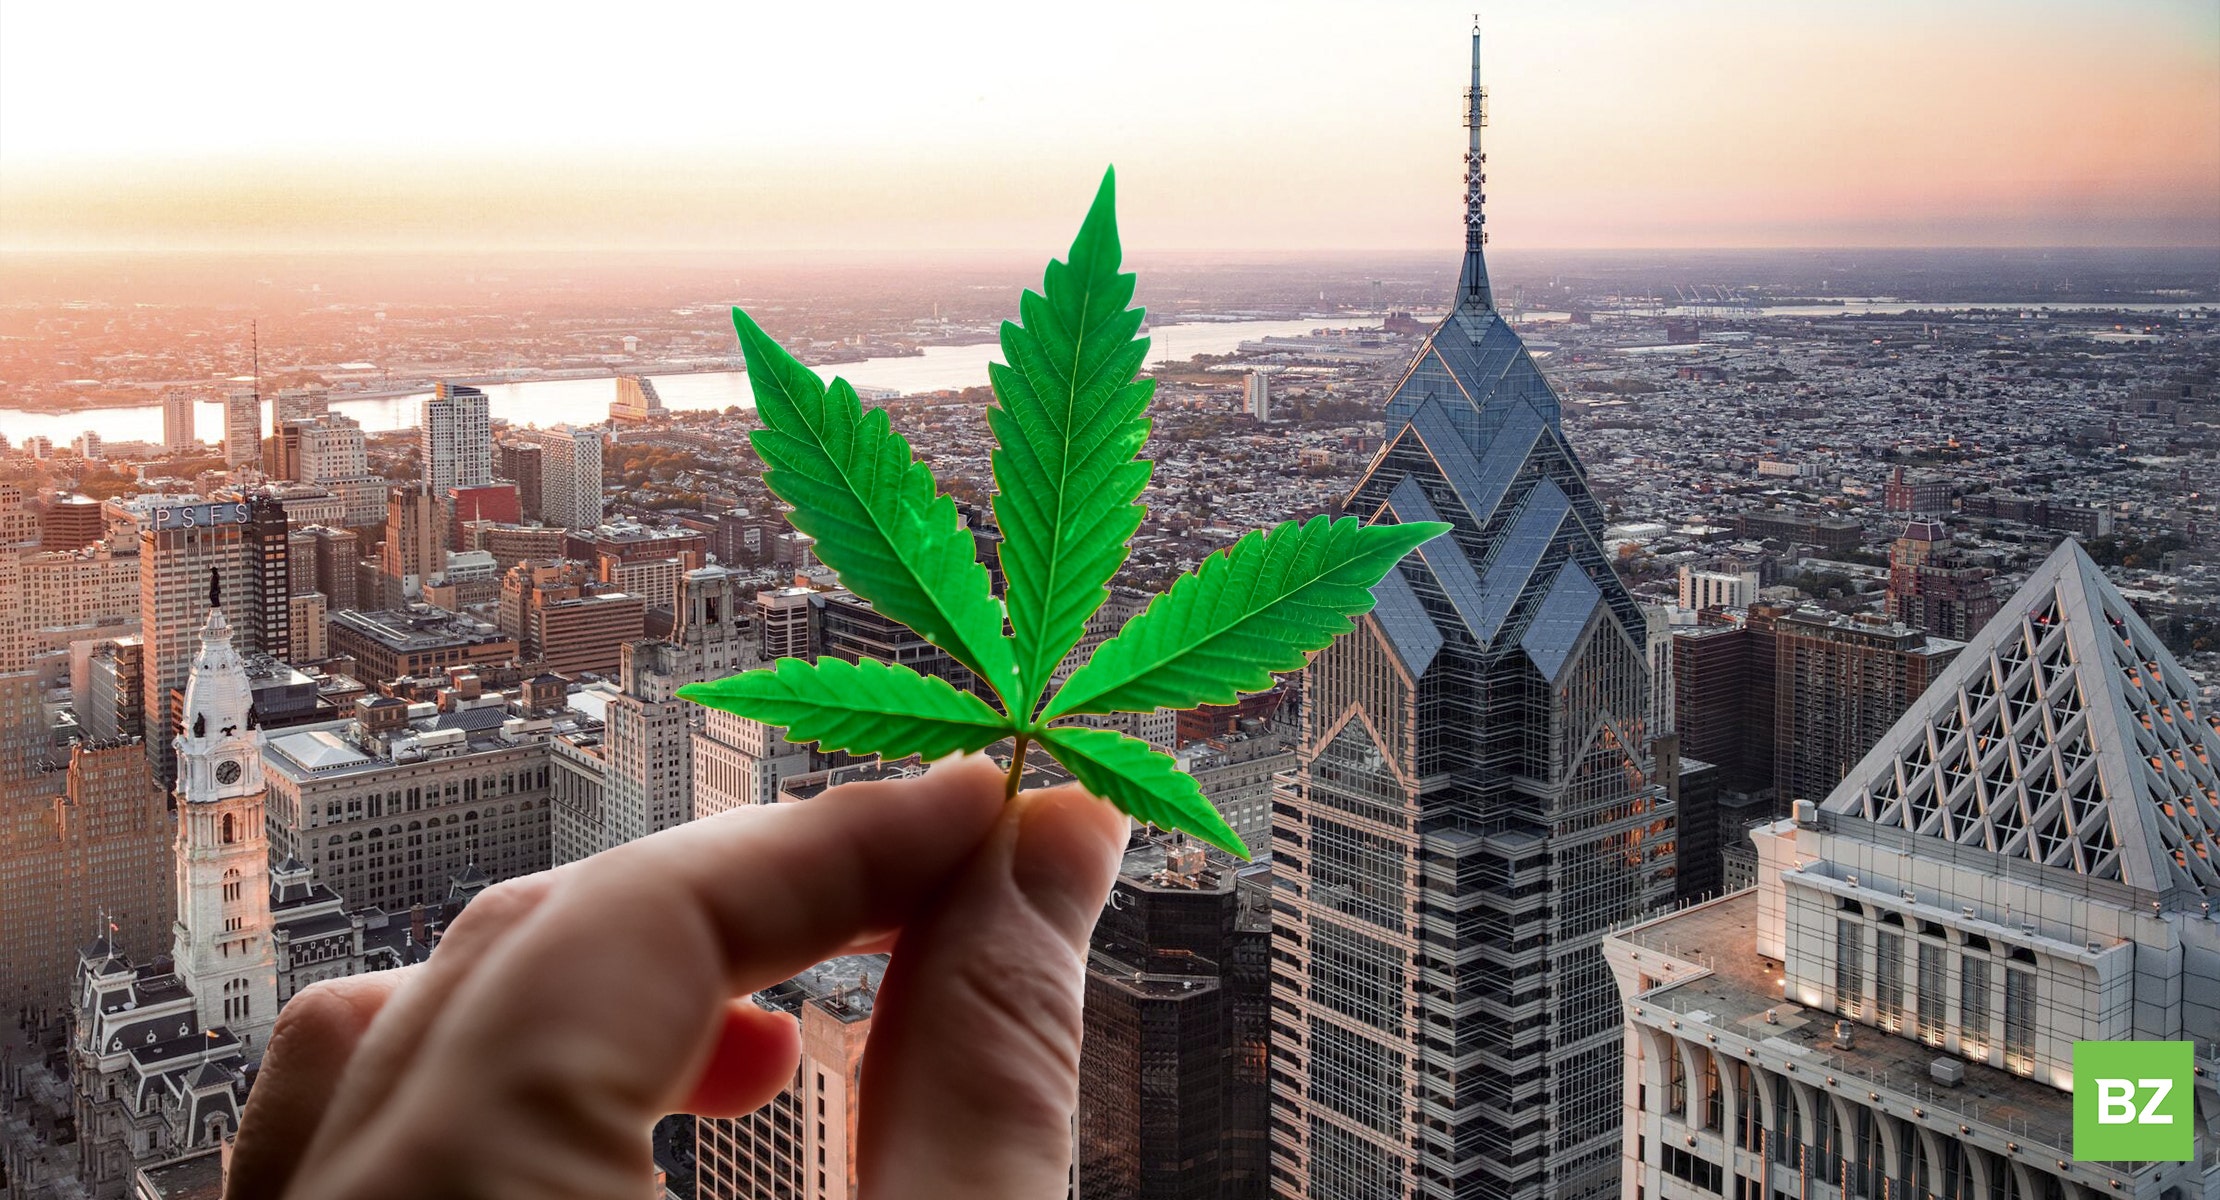 Marijuana Testing In Philadelphia Can Be Disputed By Workers, But Do They Know Their Rights?